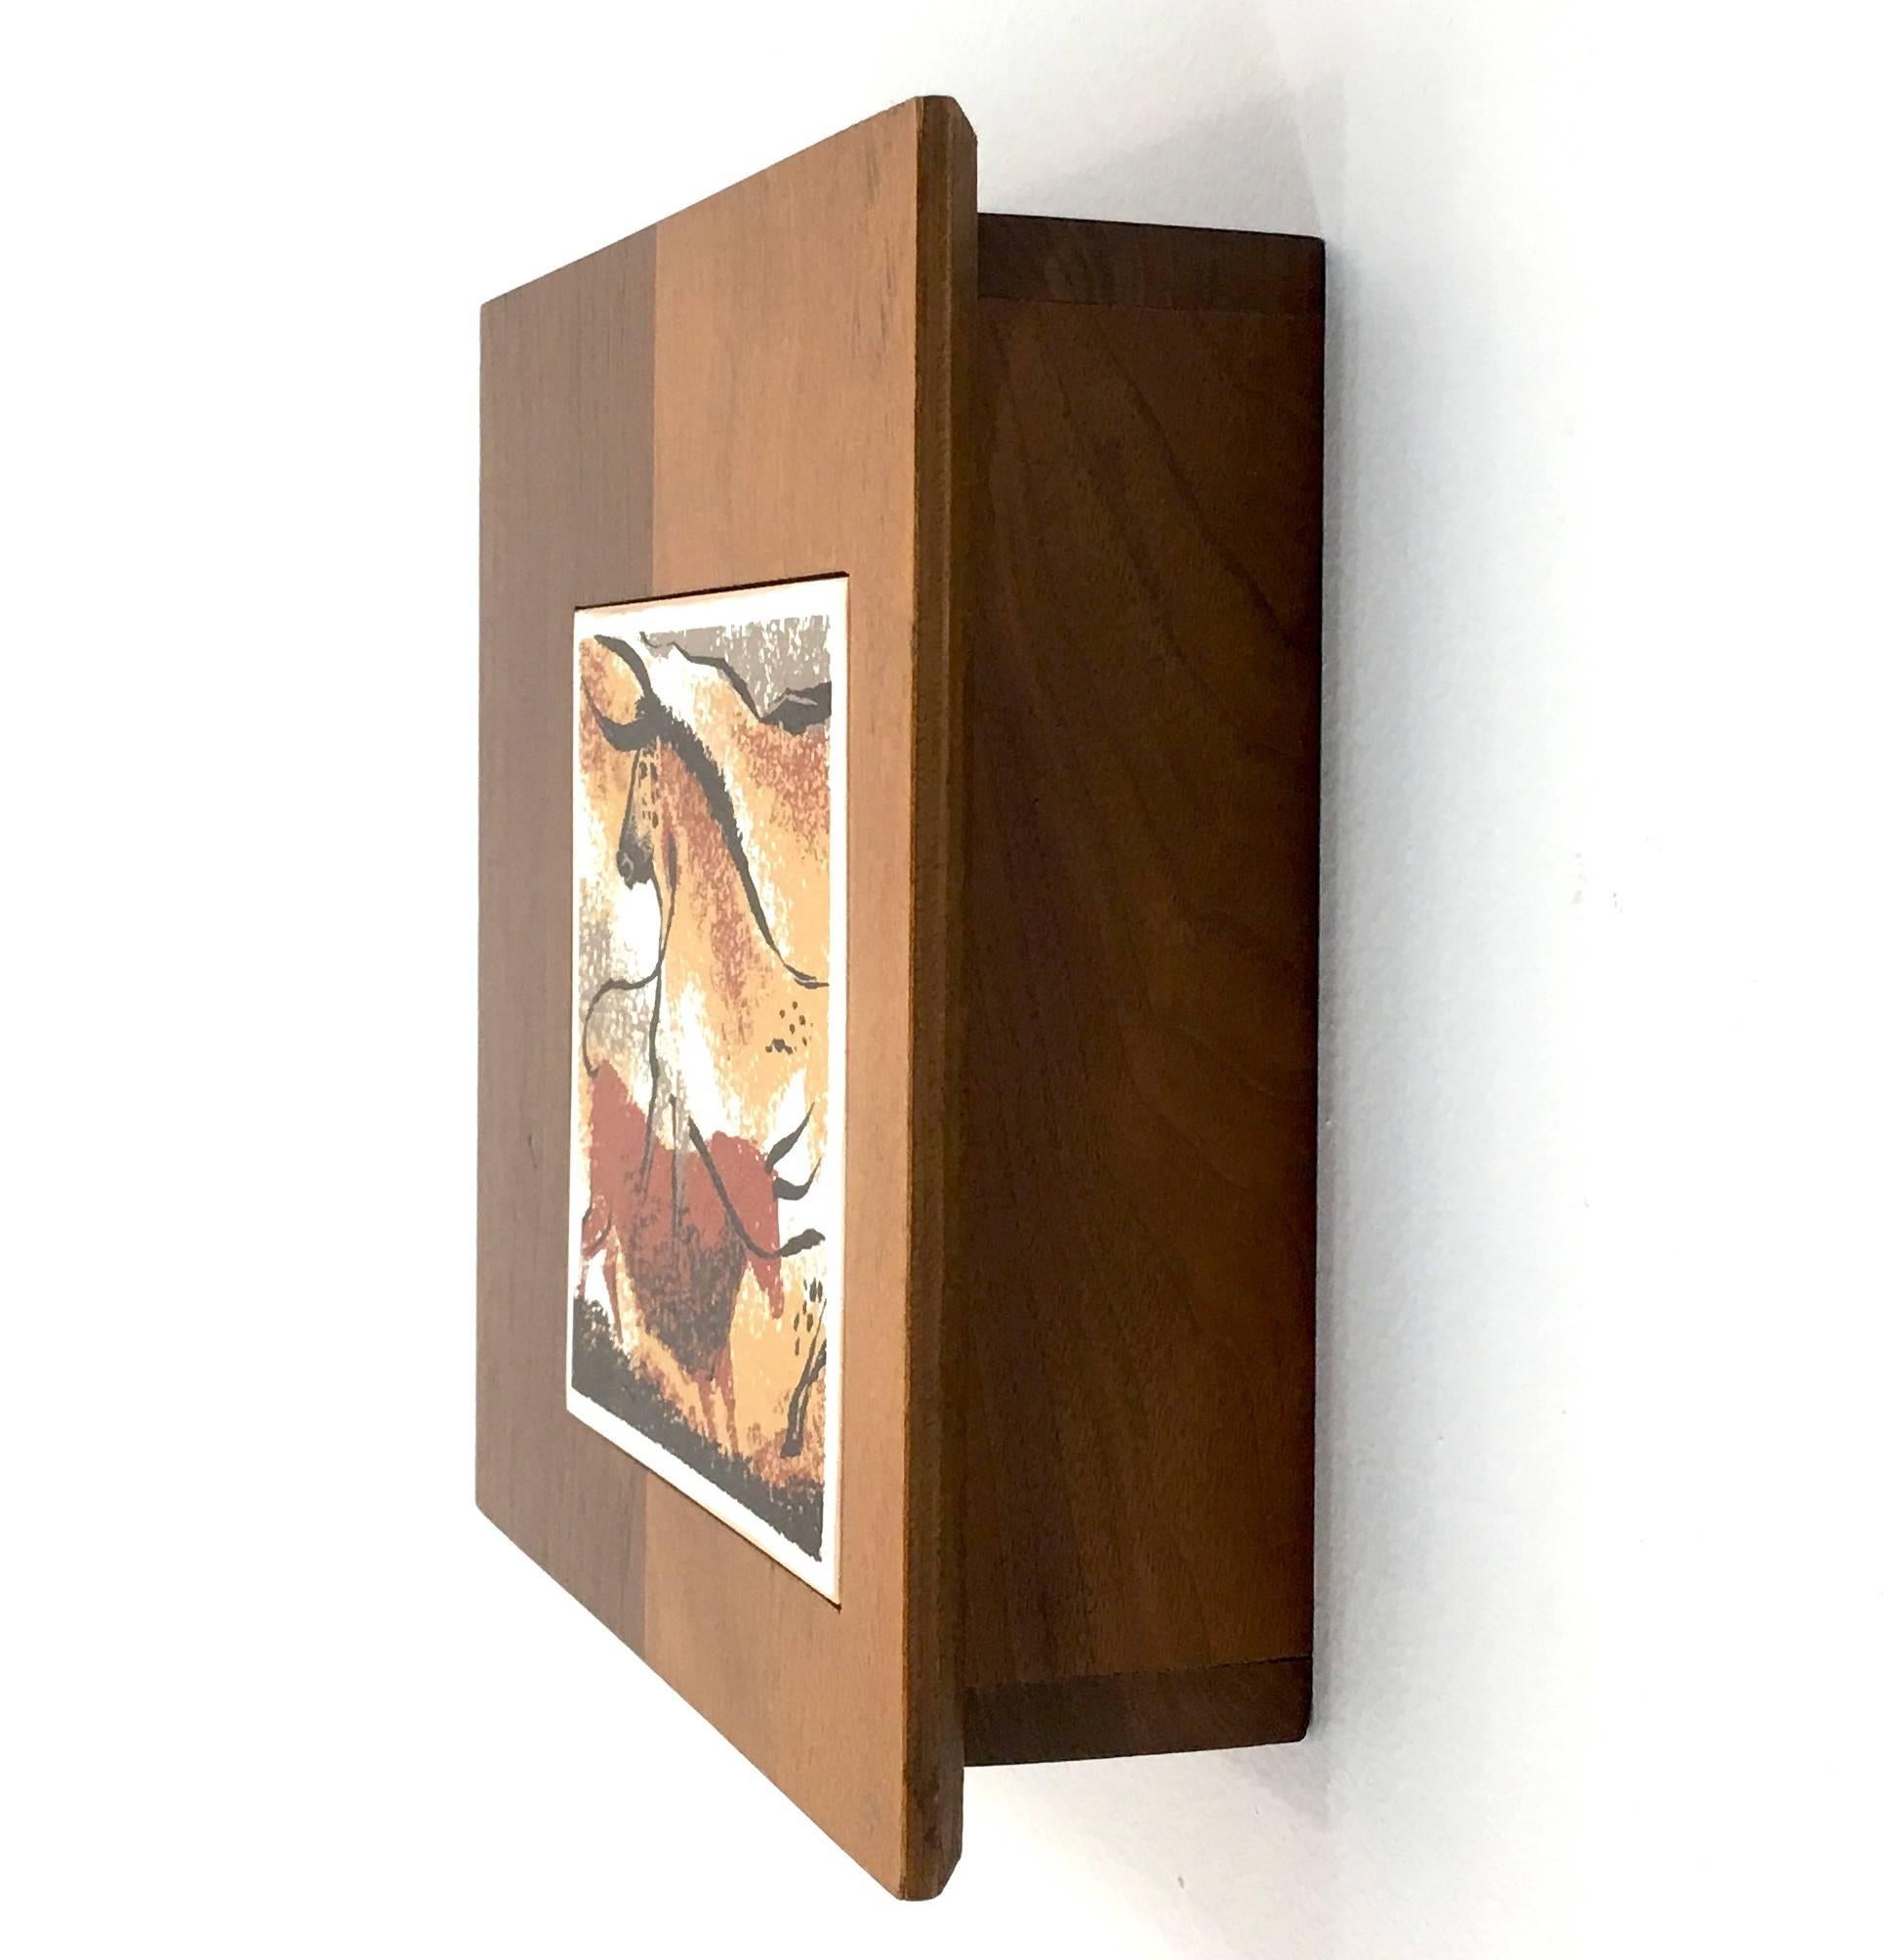 Cabinet key box
For wall mounting.
10 x 10 x 3 inches


An essential modernist decor accent item often overlooked, yet entirely functional and practical. A key holder cabinet produced from two-toned walnut and ash that mounts to the wall where